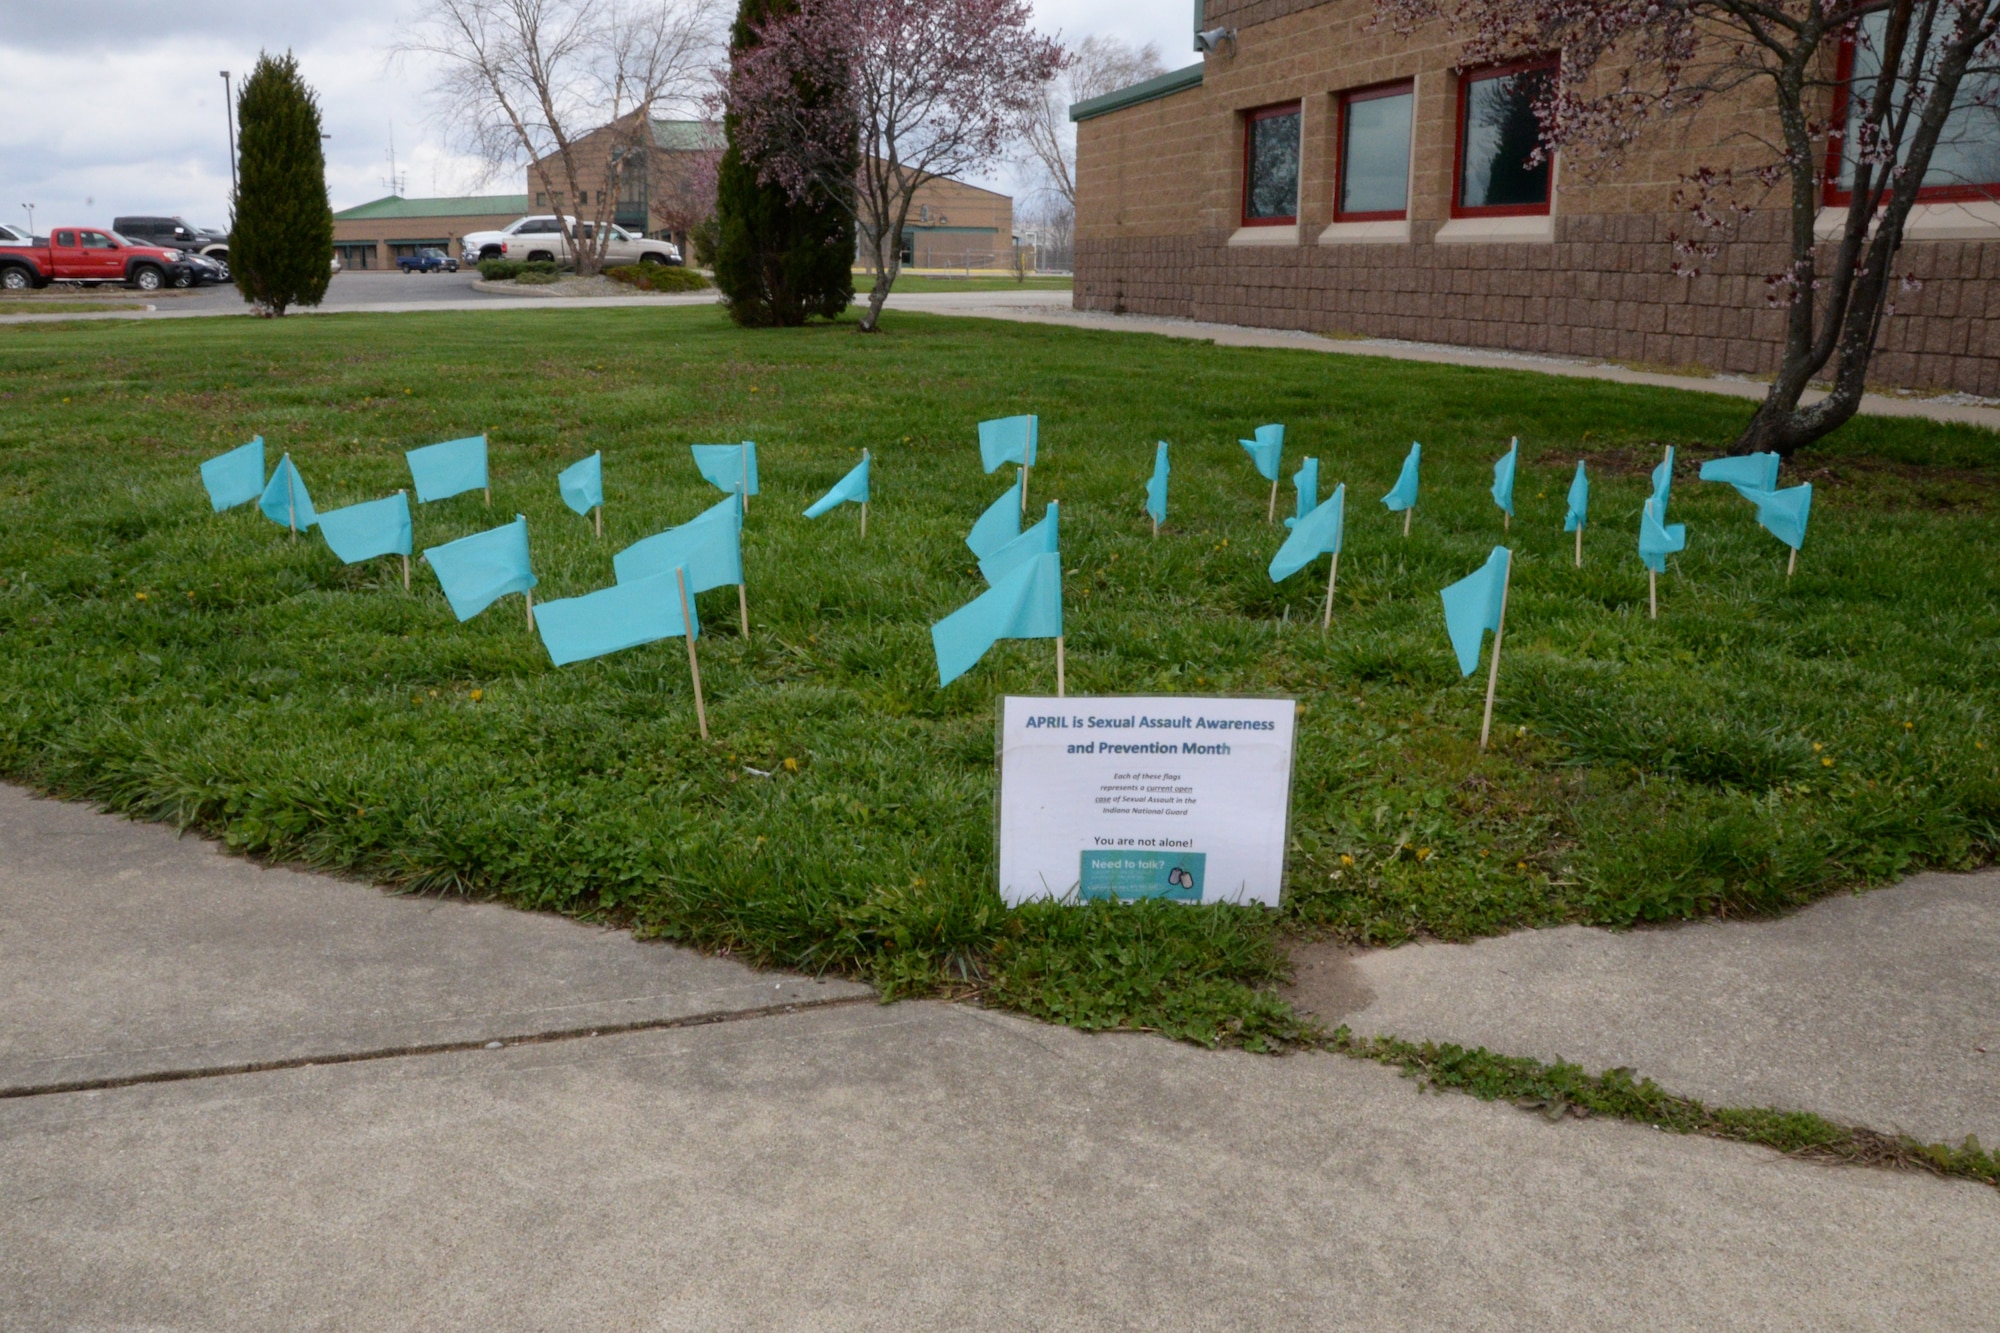 Flags are placed in the ground outside the dining facility at Hulman Field Air National Guard base, Ind., April 7, 2016. Each represented a current open case of sexual assault in the Indiana Air National Guard. The flags were placed to show support of Sexual Assault Prevention month. (U.S. Air National Guard photo by Senior Airman Lonnie Wiram)